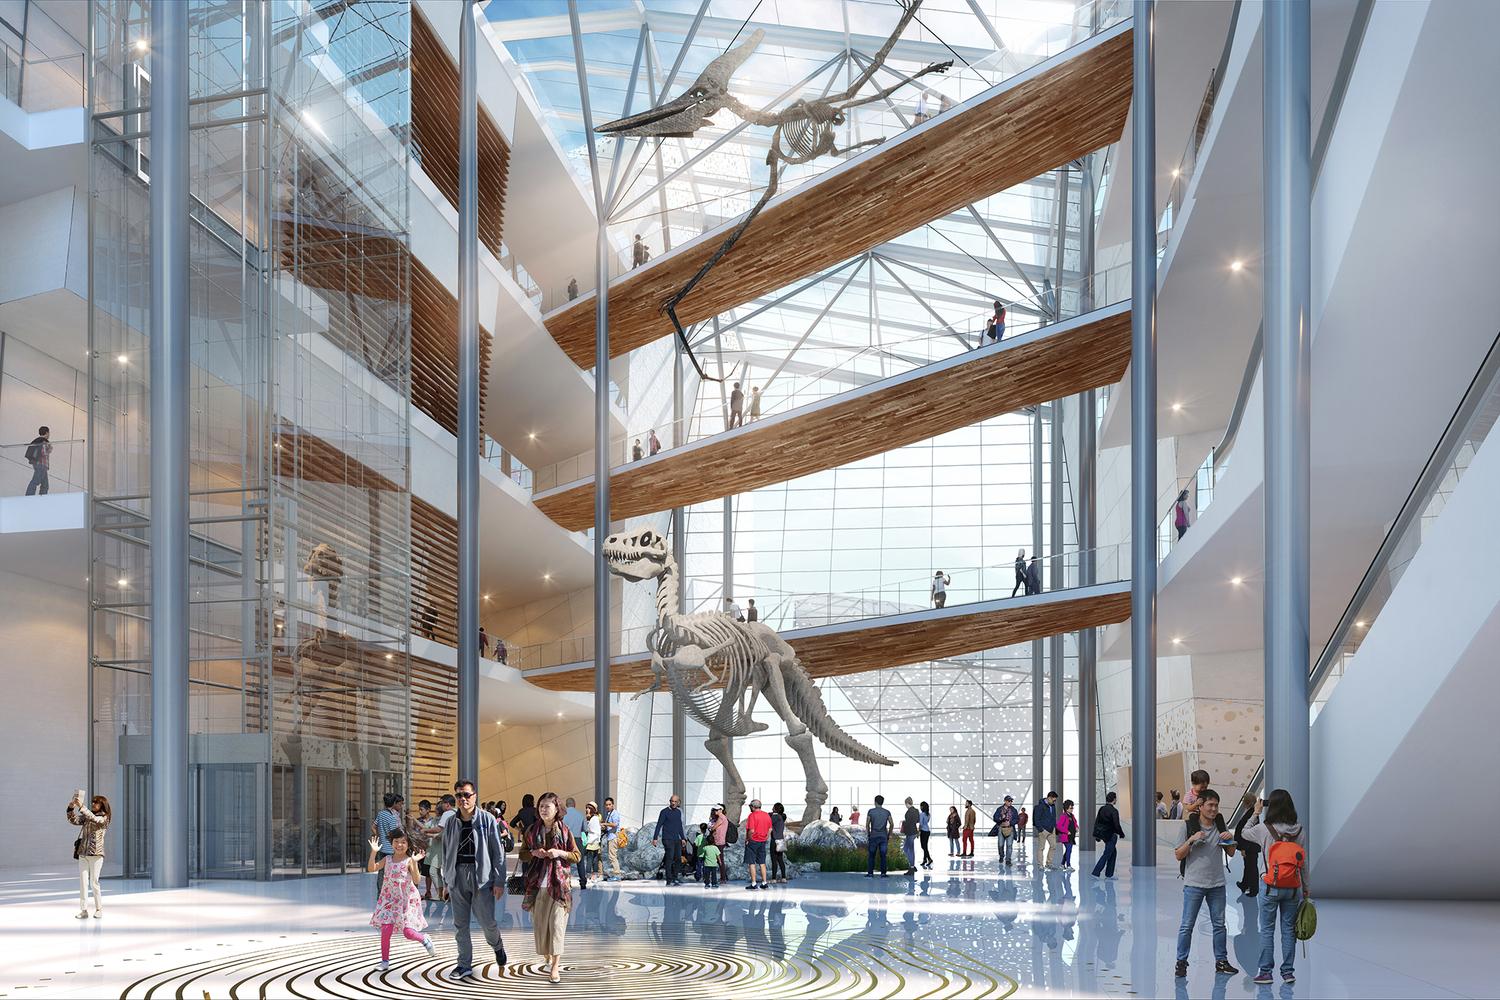 A series of sky bridges will cross the atrium, connecting the exhibits with the public amenities on either side / Steelblue